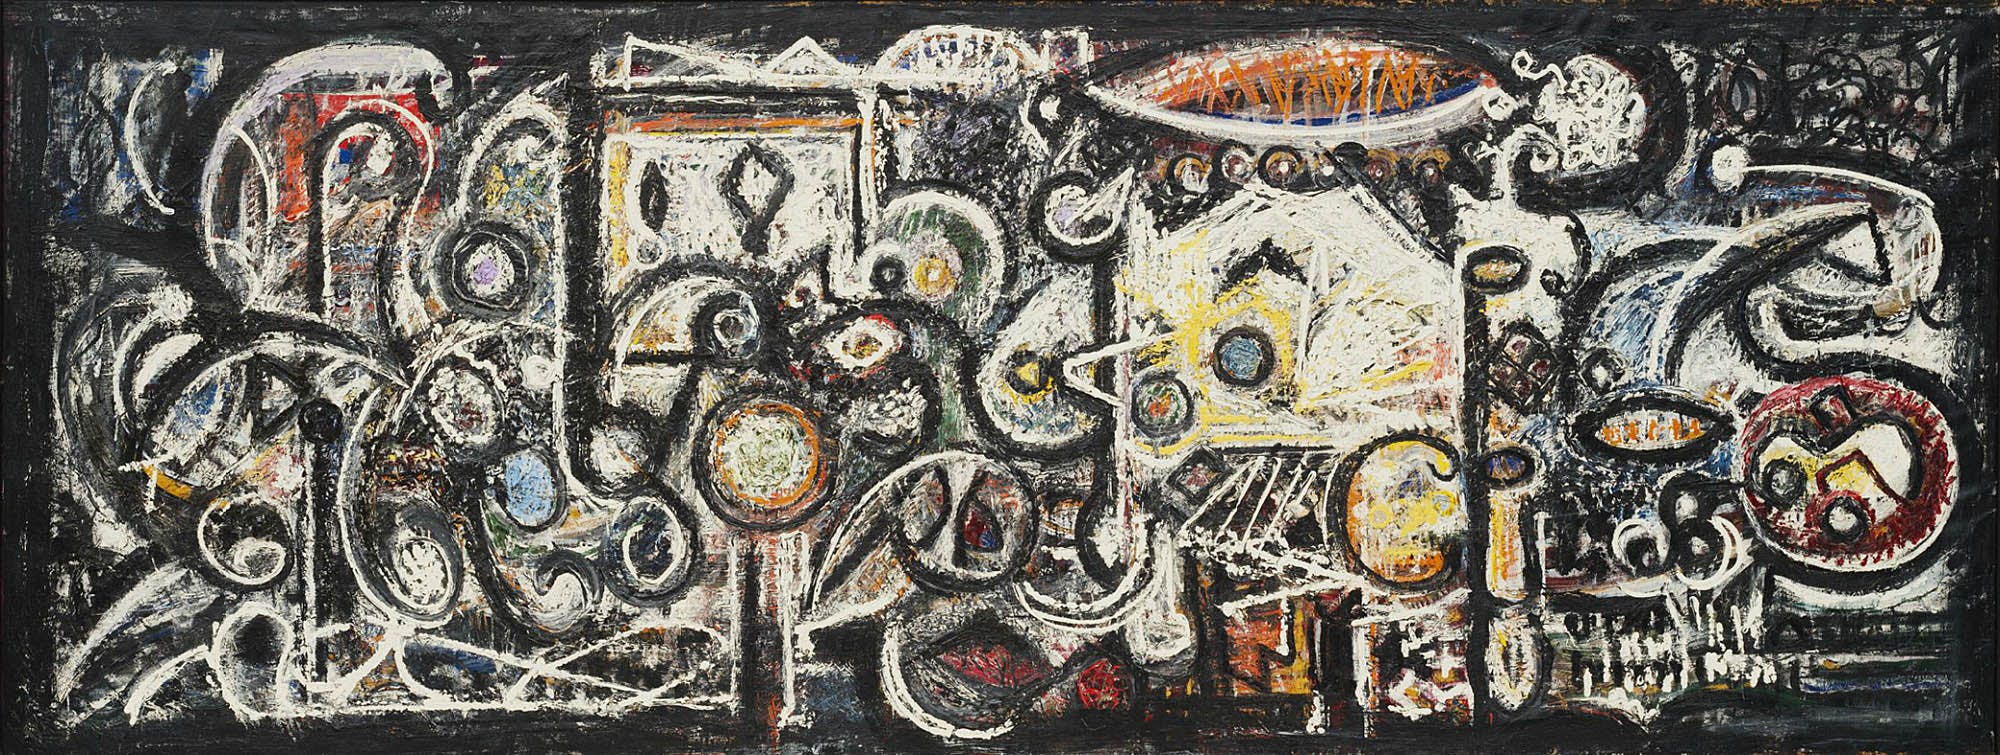 _Fugue Number 2_, 1943, oil and sand on canvas, 41 ⅛ x 106 ½ in. (104.2 x 270.4 cm), The Museum of Modern Art, New York, Given anonymously (1100.1969)
 – The Richard Pousette-Dart Foundation